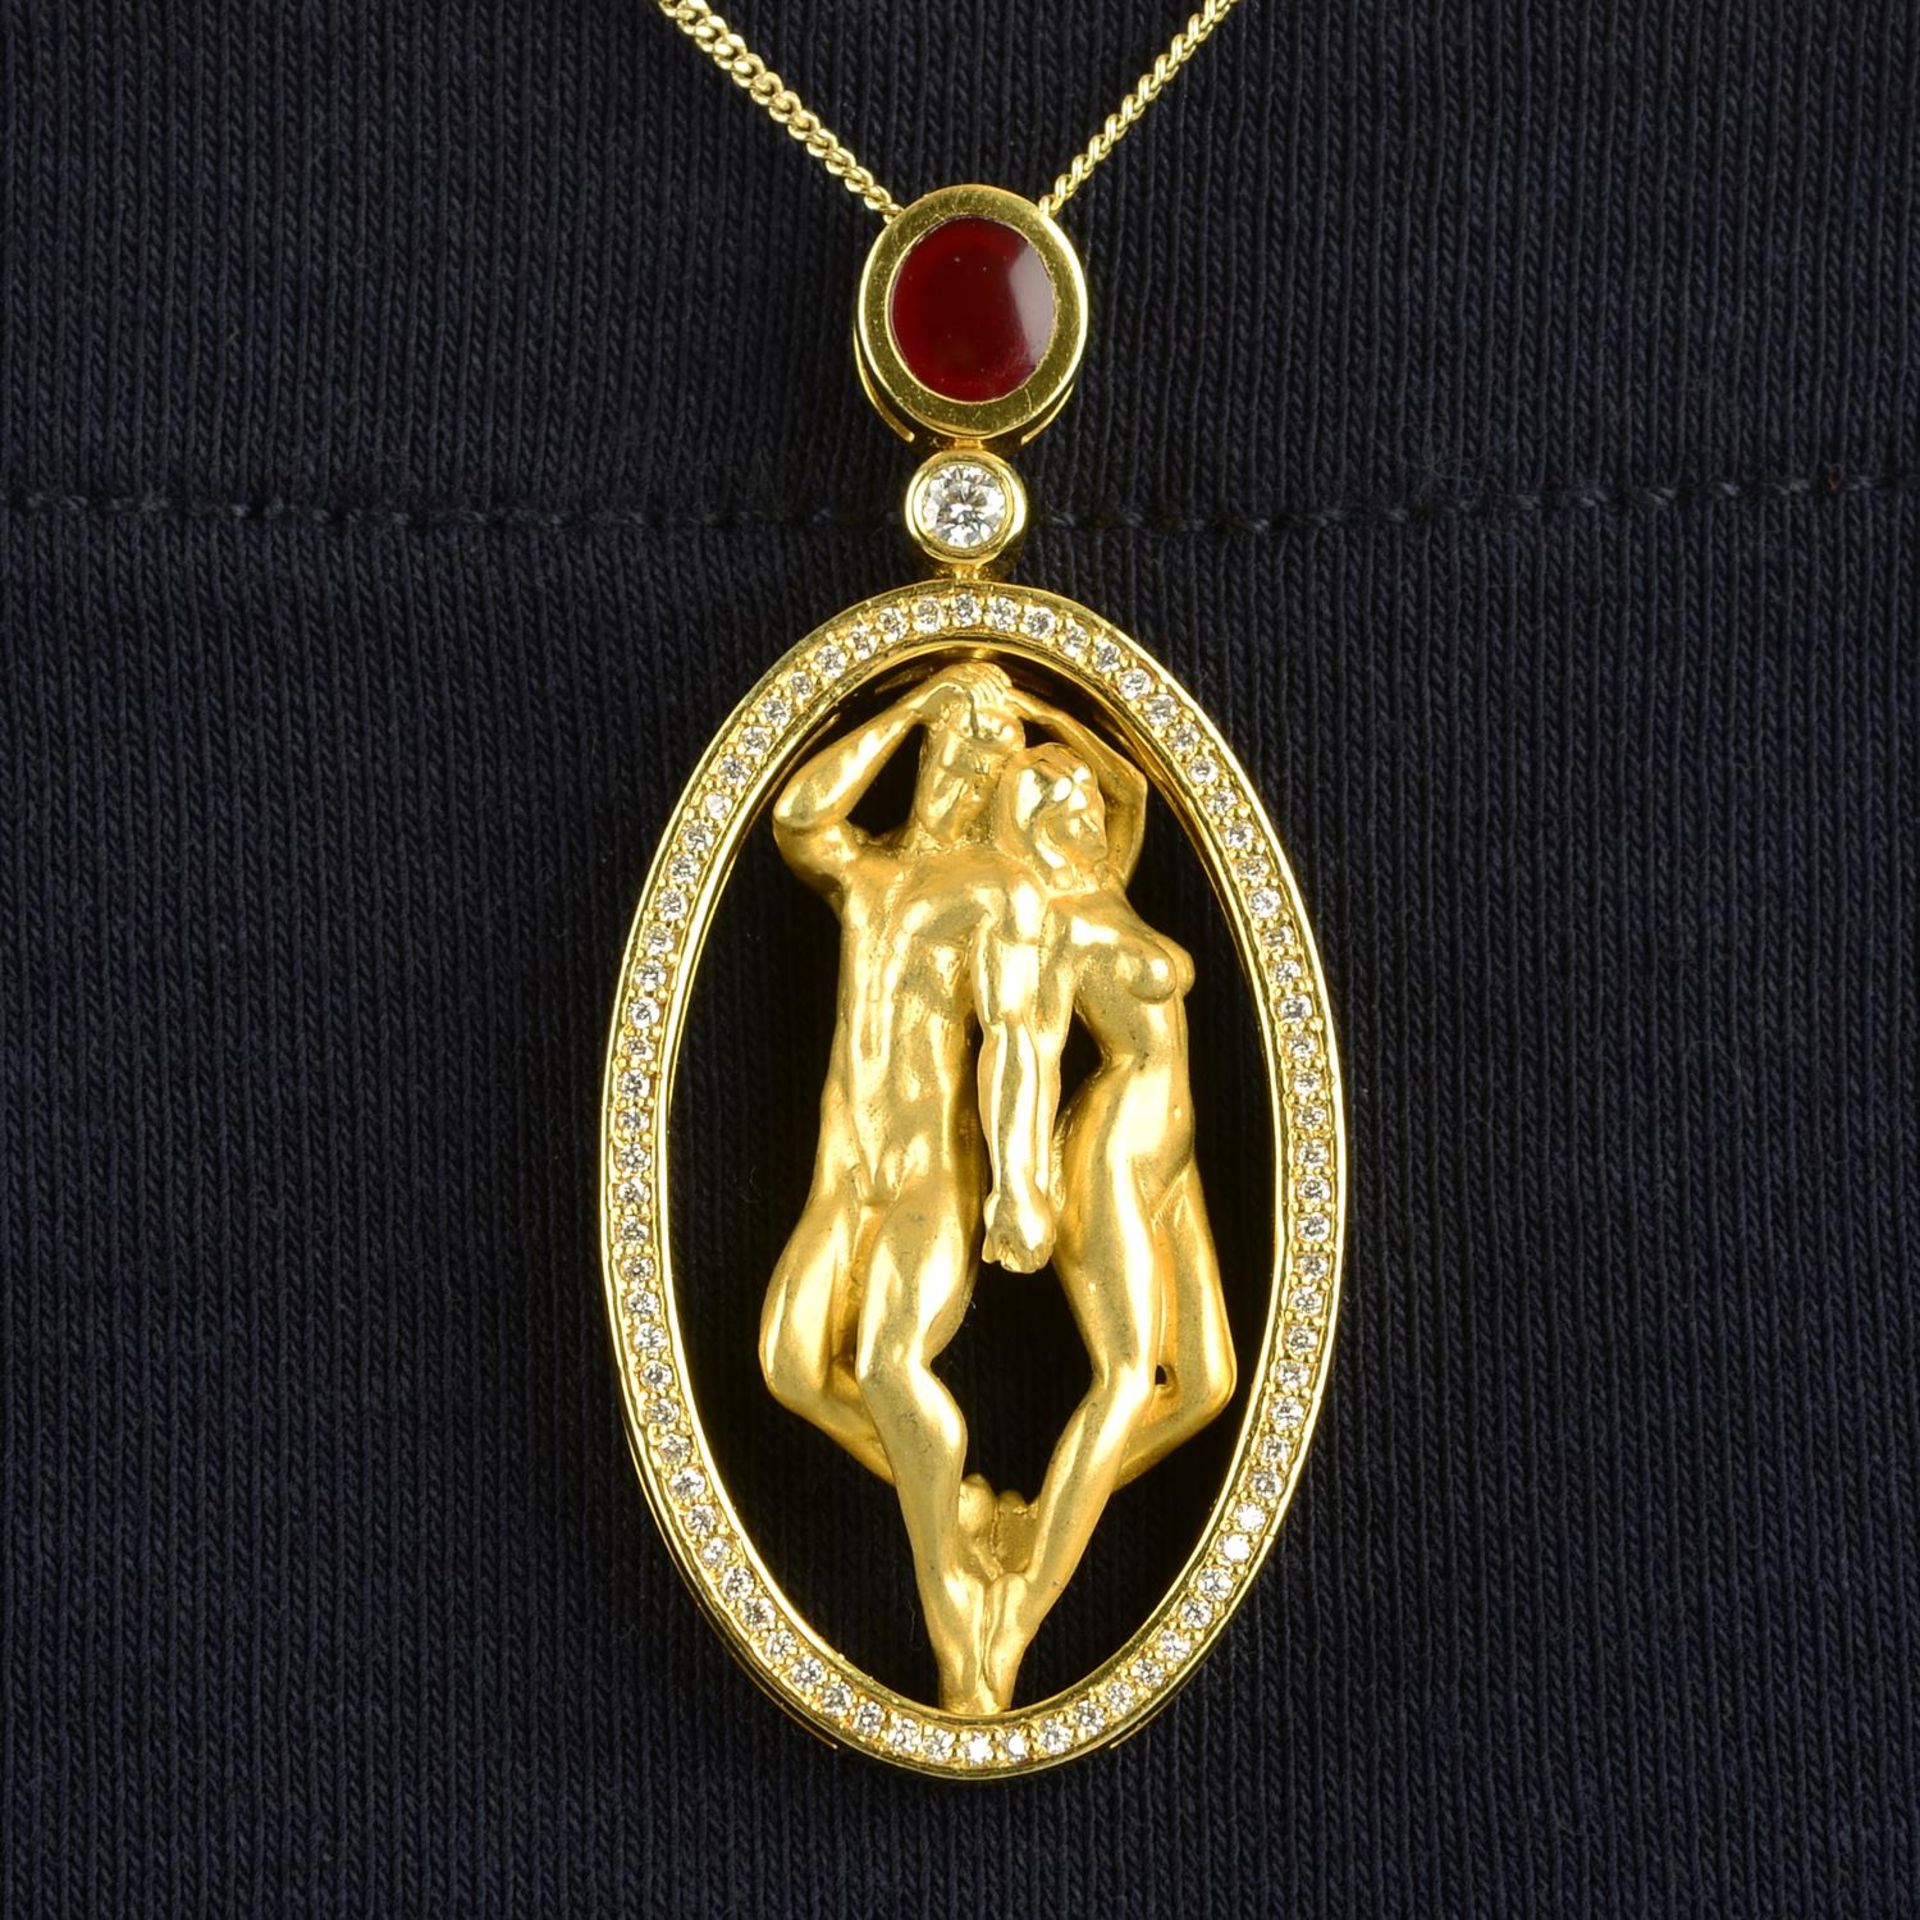 A brilliant-cut diamond and red enamel 'The Venue' pendant, by Celeste, from their 'Symphony of